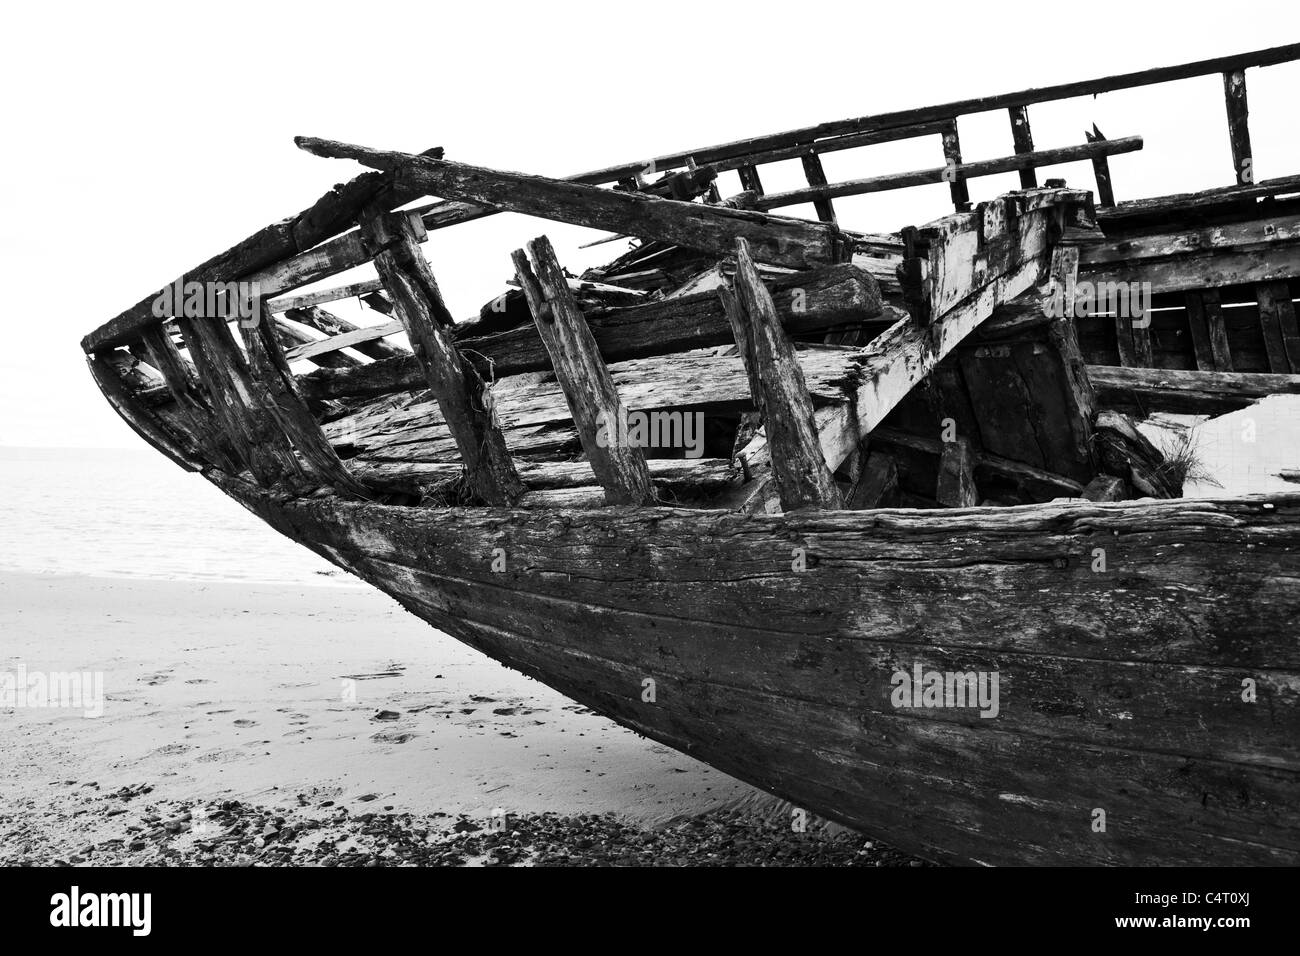 A Wrecked Wooden Hulled Fishing Boat Stock Photo